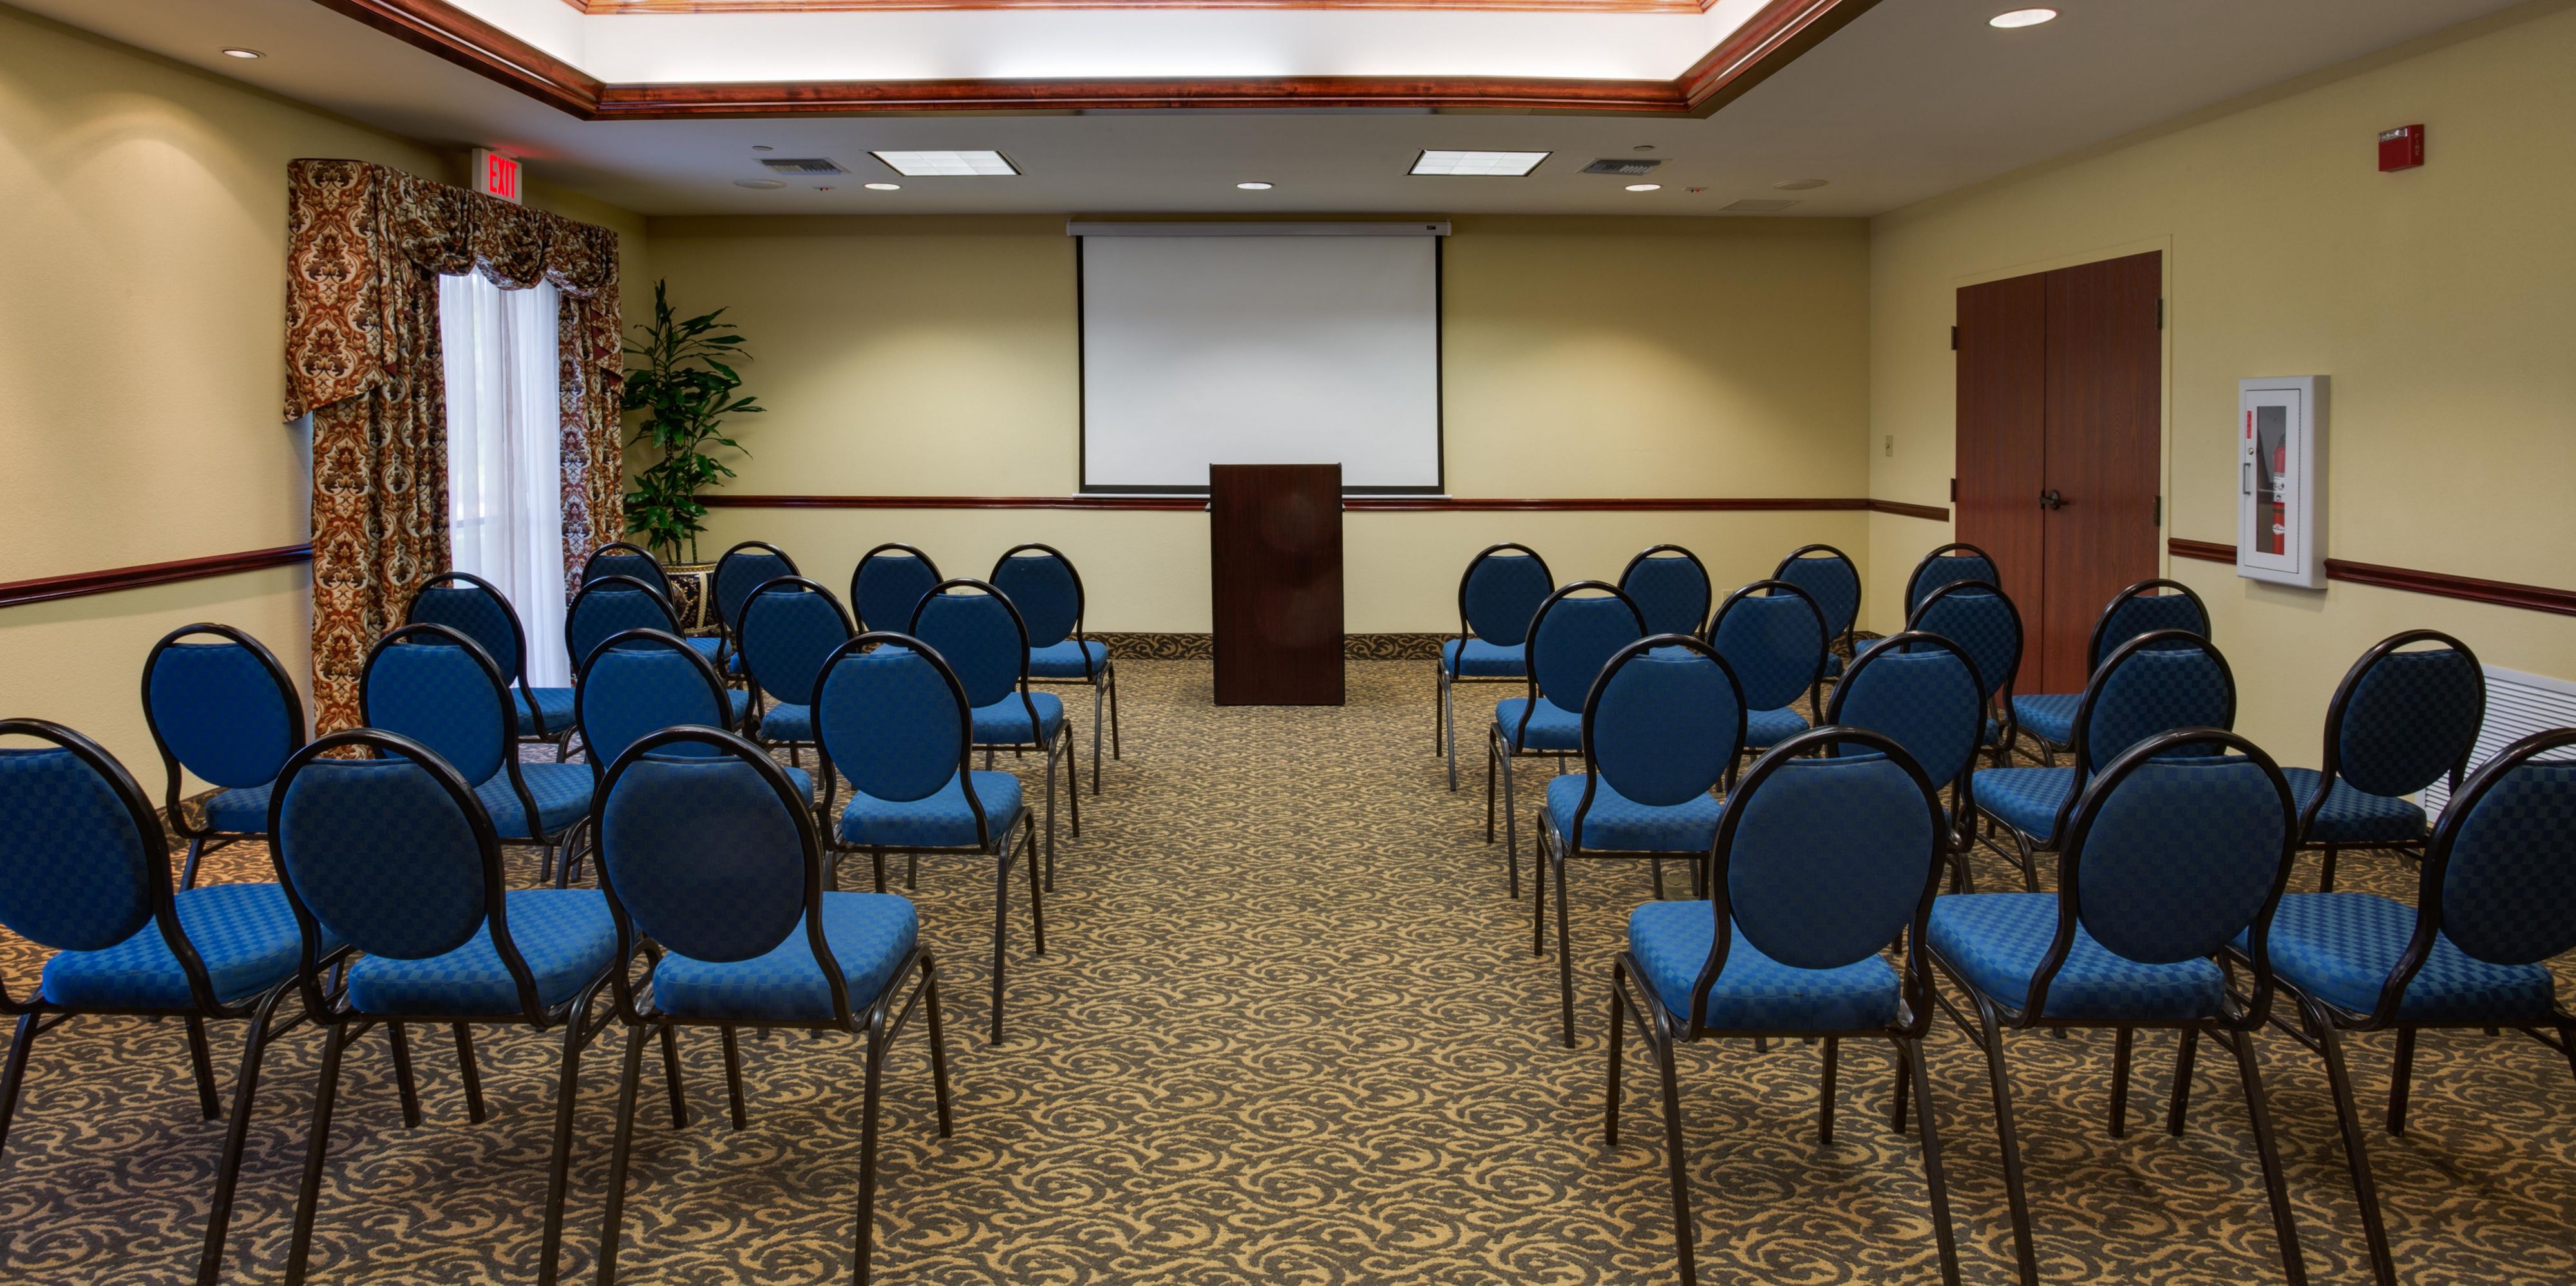 We are delighted to offer a variety of options for your next meeting or event. Our comfortable guest suites and functional meeting room will provide an ideal setting for a wide range of events. 